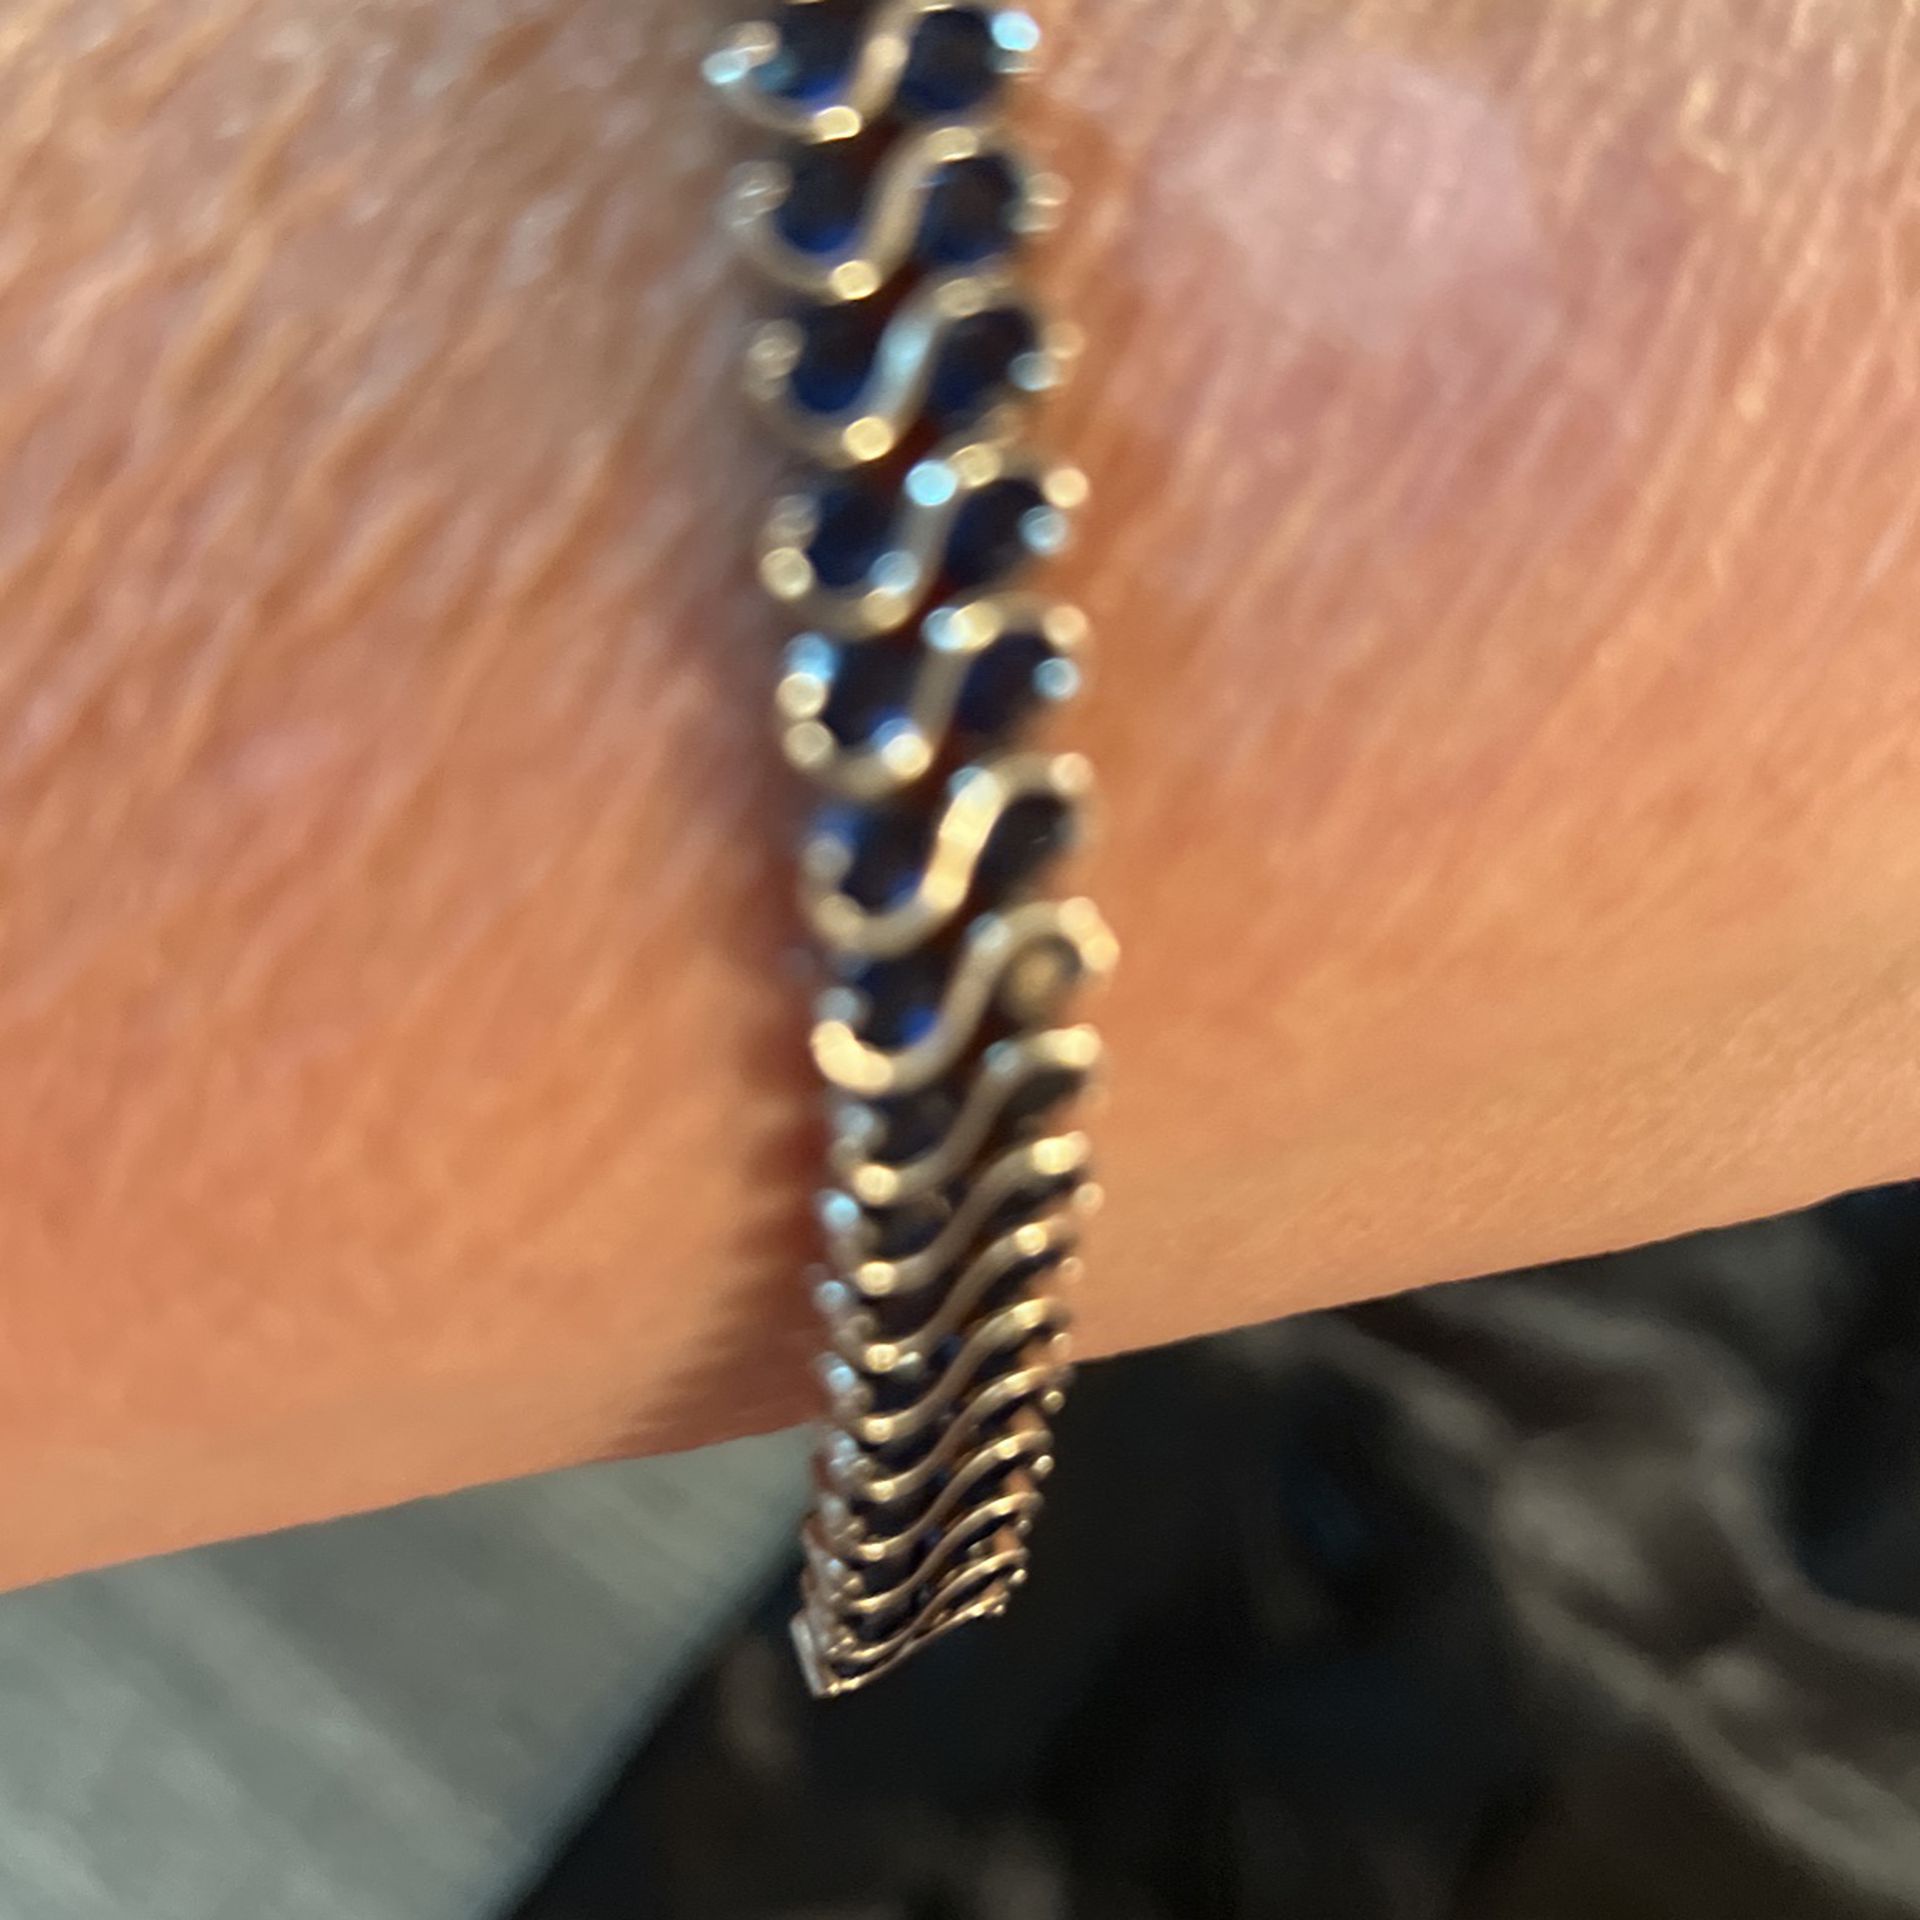 New Beautiful Sapphire Double Row Tennis Braclet Sterling Silver With Box $15 C My 100 Of Items Ty